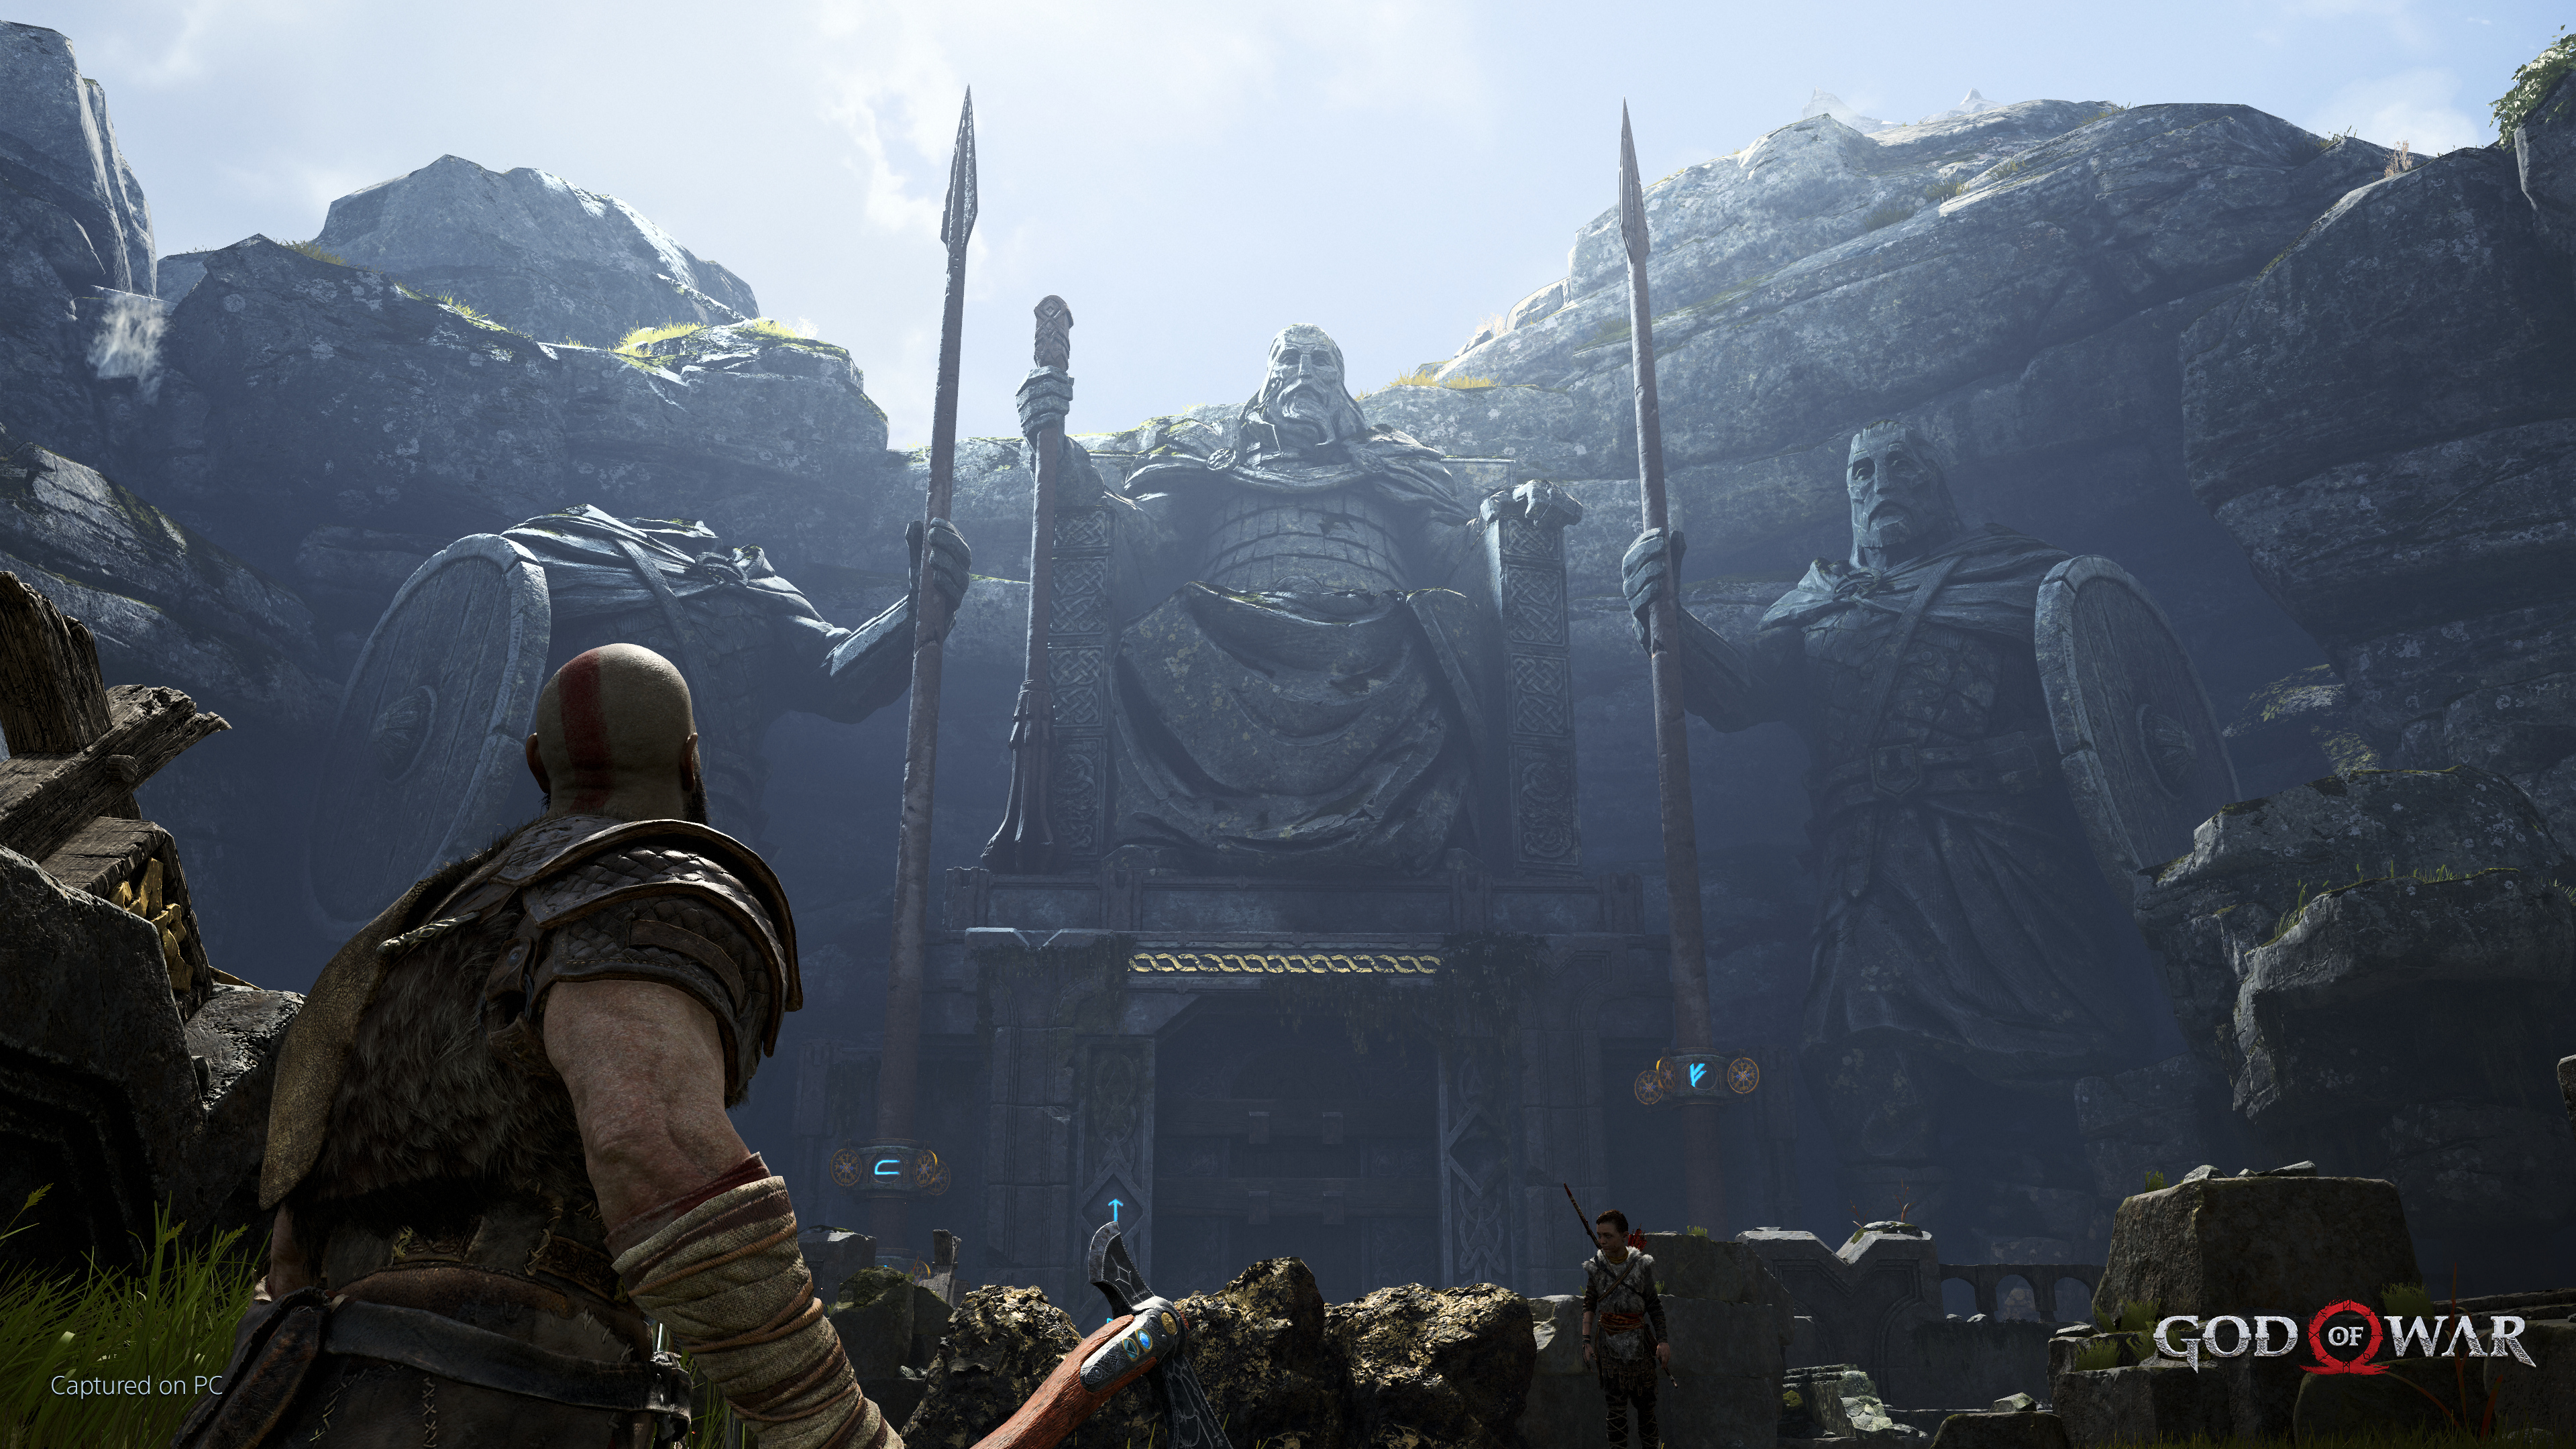 IGN on X: 2018's God of War is on its way to PC, arriving for Steam in  January 2022.   / X